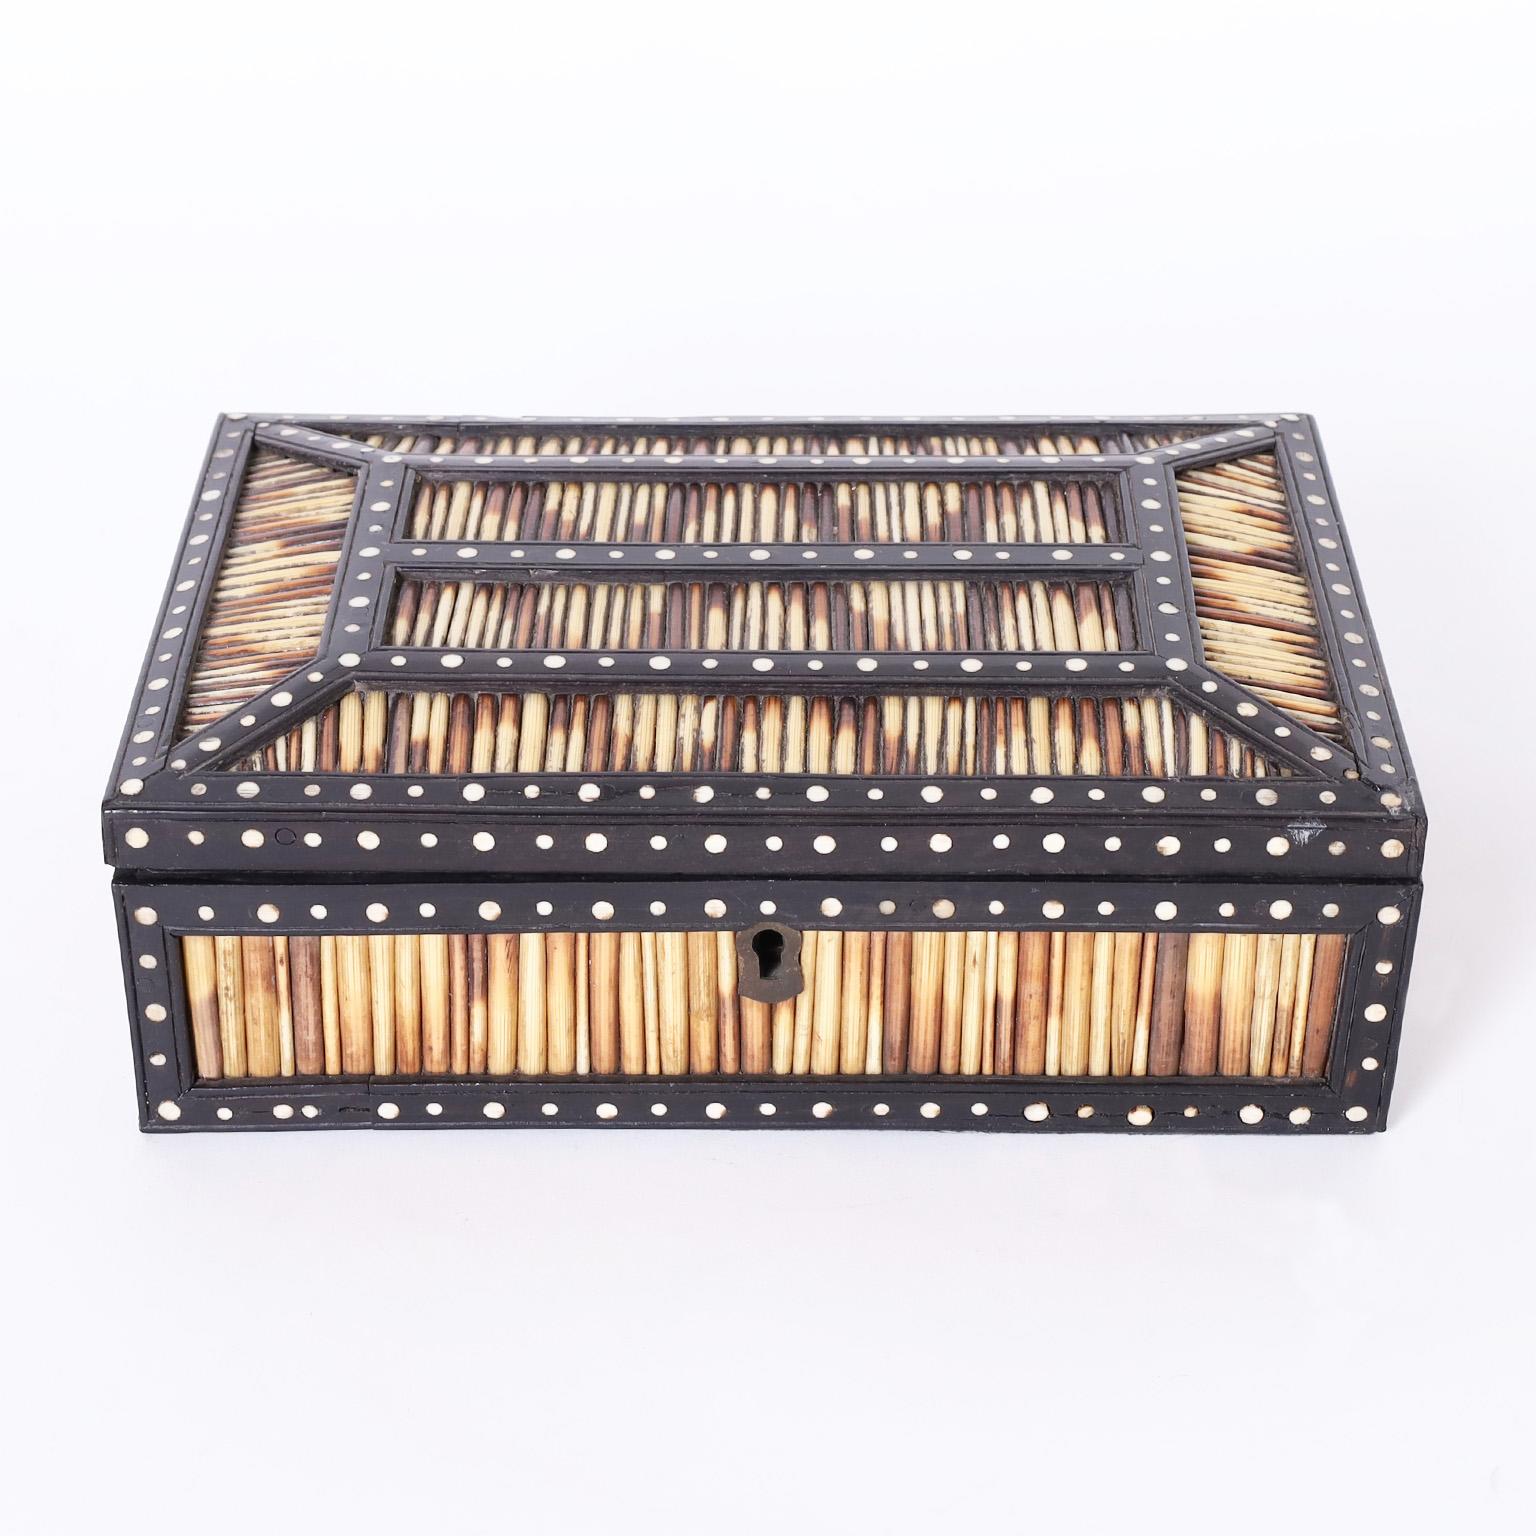 Anglo Indian antique lidded box crafted in indigenous hardwood decorated in porcupine quills and bone dots inside and out.